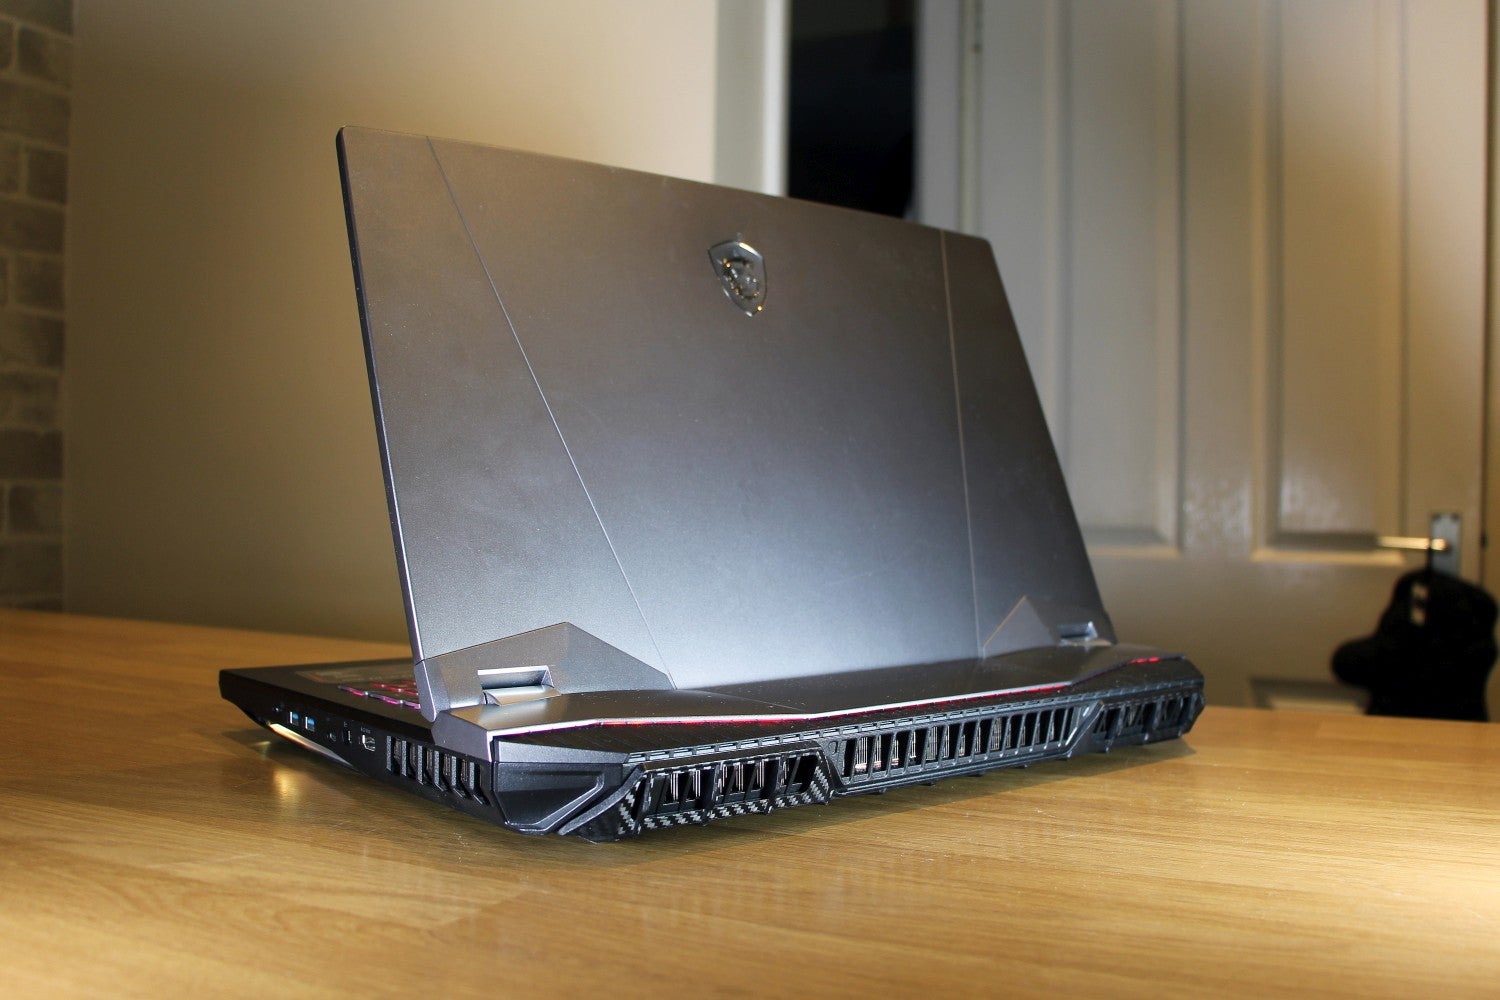 MSI GT76 Titan DT 9SGBack left view of a gray-black MSI GT76 laptop standing on a wooden table